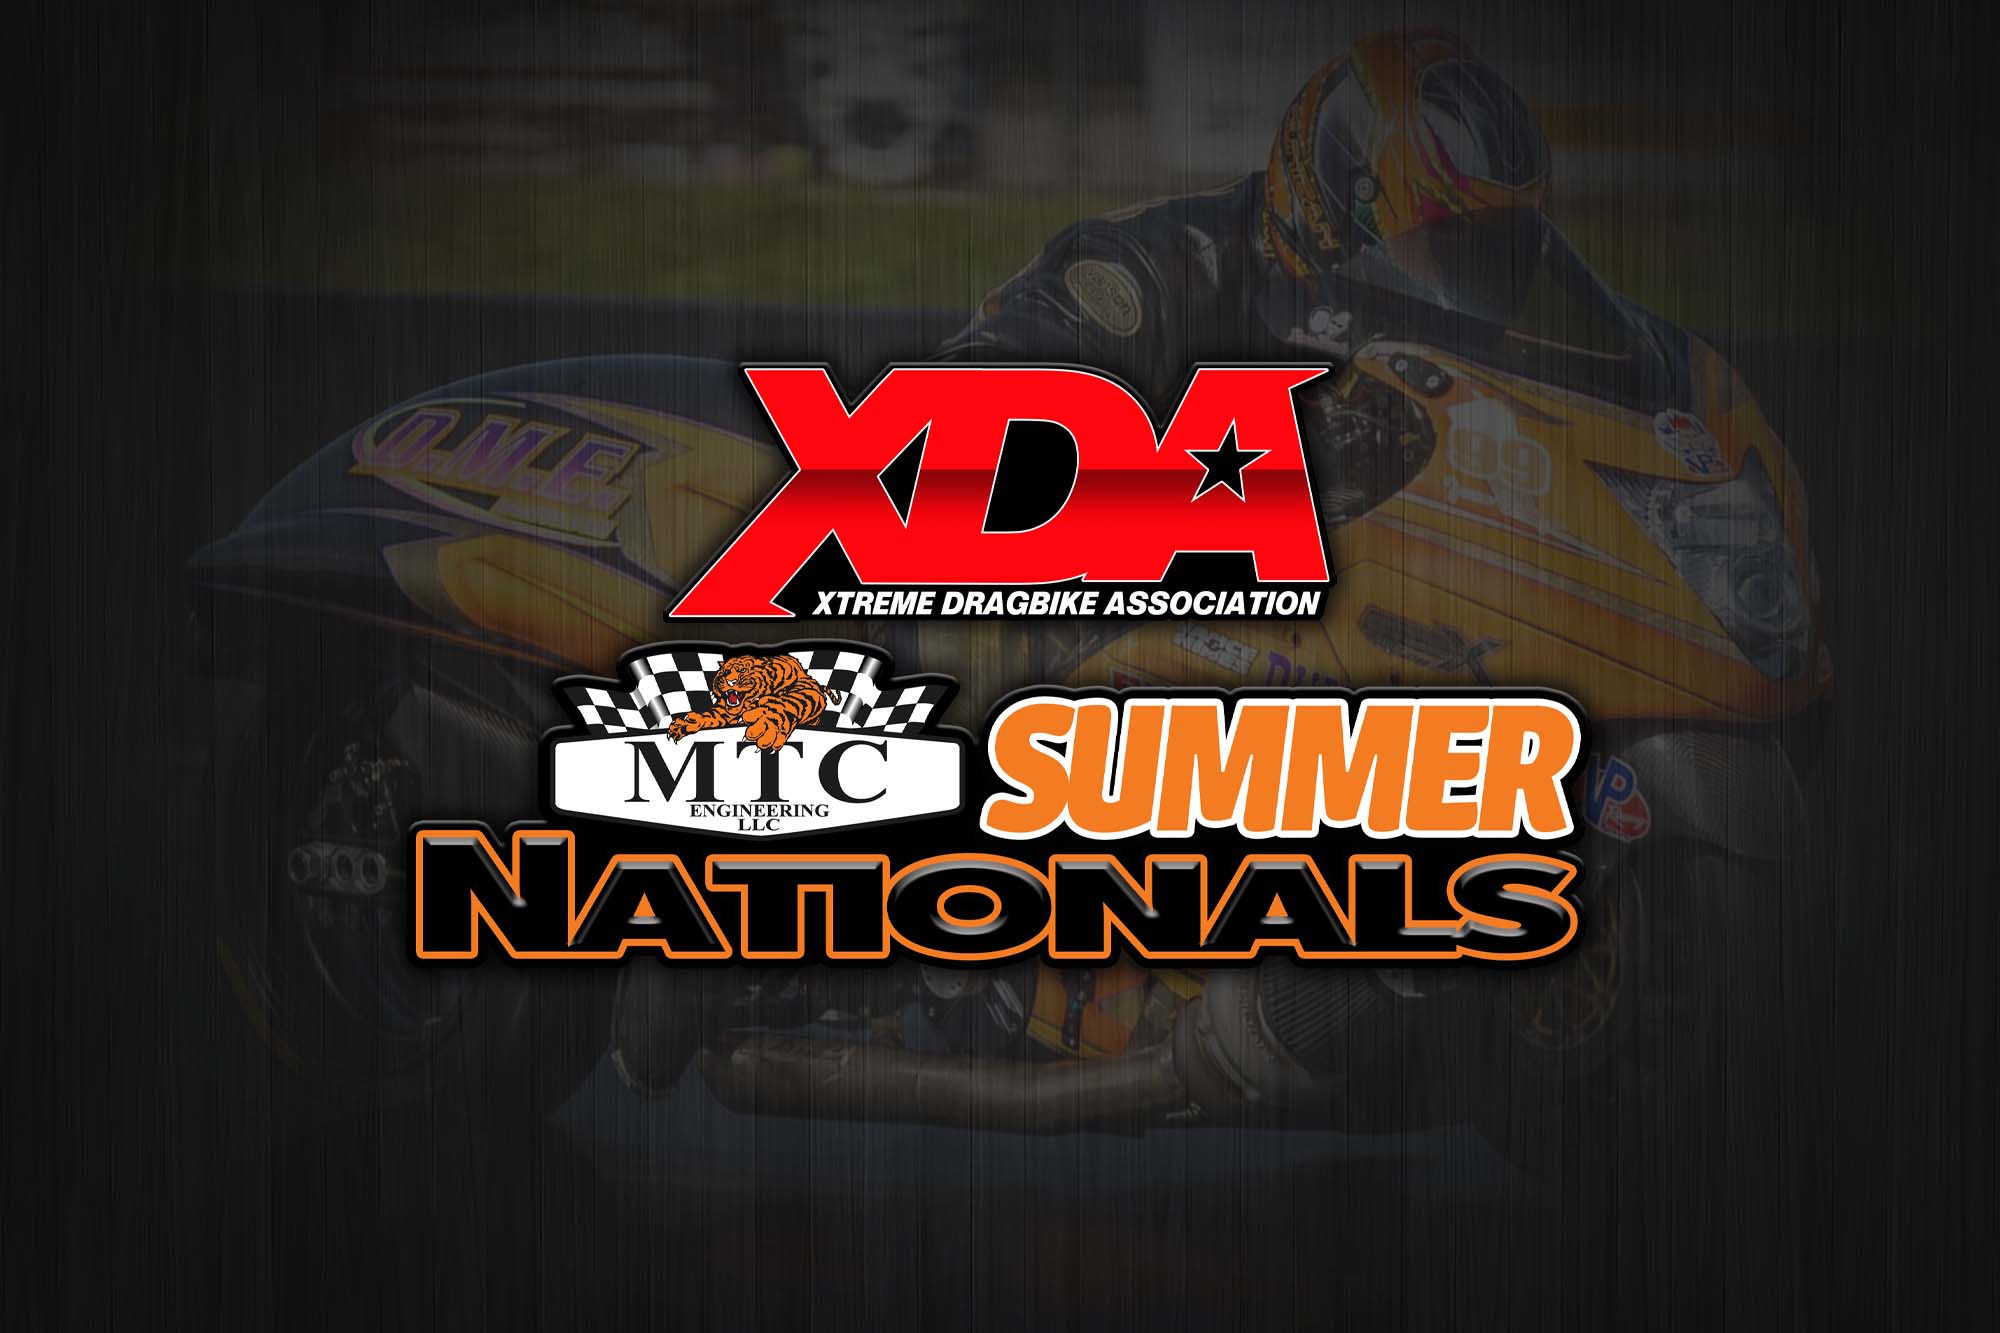 XDA Headed to Virginia on May 17-19 for the MTC Engineering Summer Nationals